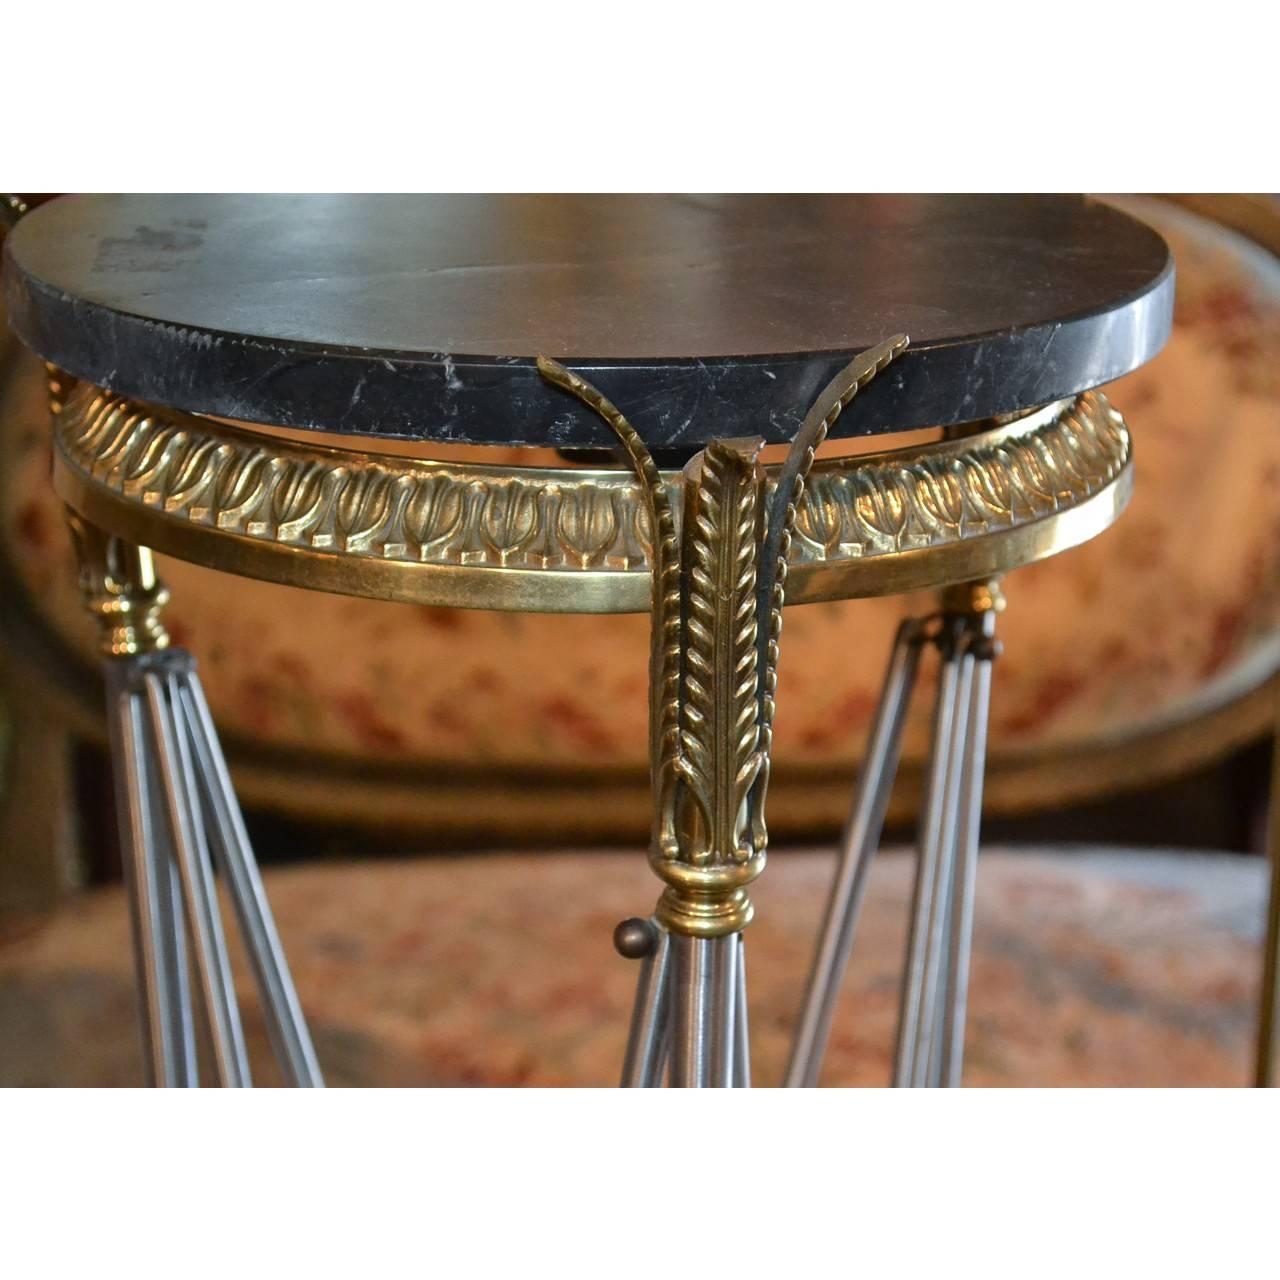 Striking polished steel and brass pedestal with a dark grey to blackish thick marble top. Highly sought after by designers,
circa 1940, France.
Measure: 46 inches height x 12 inches in diameter.